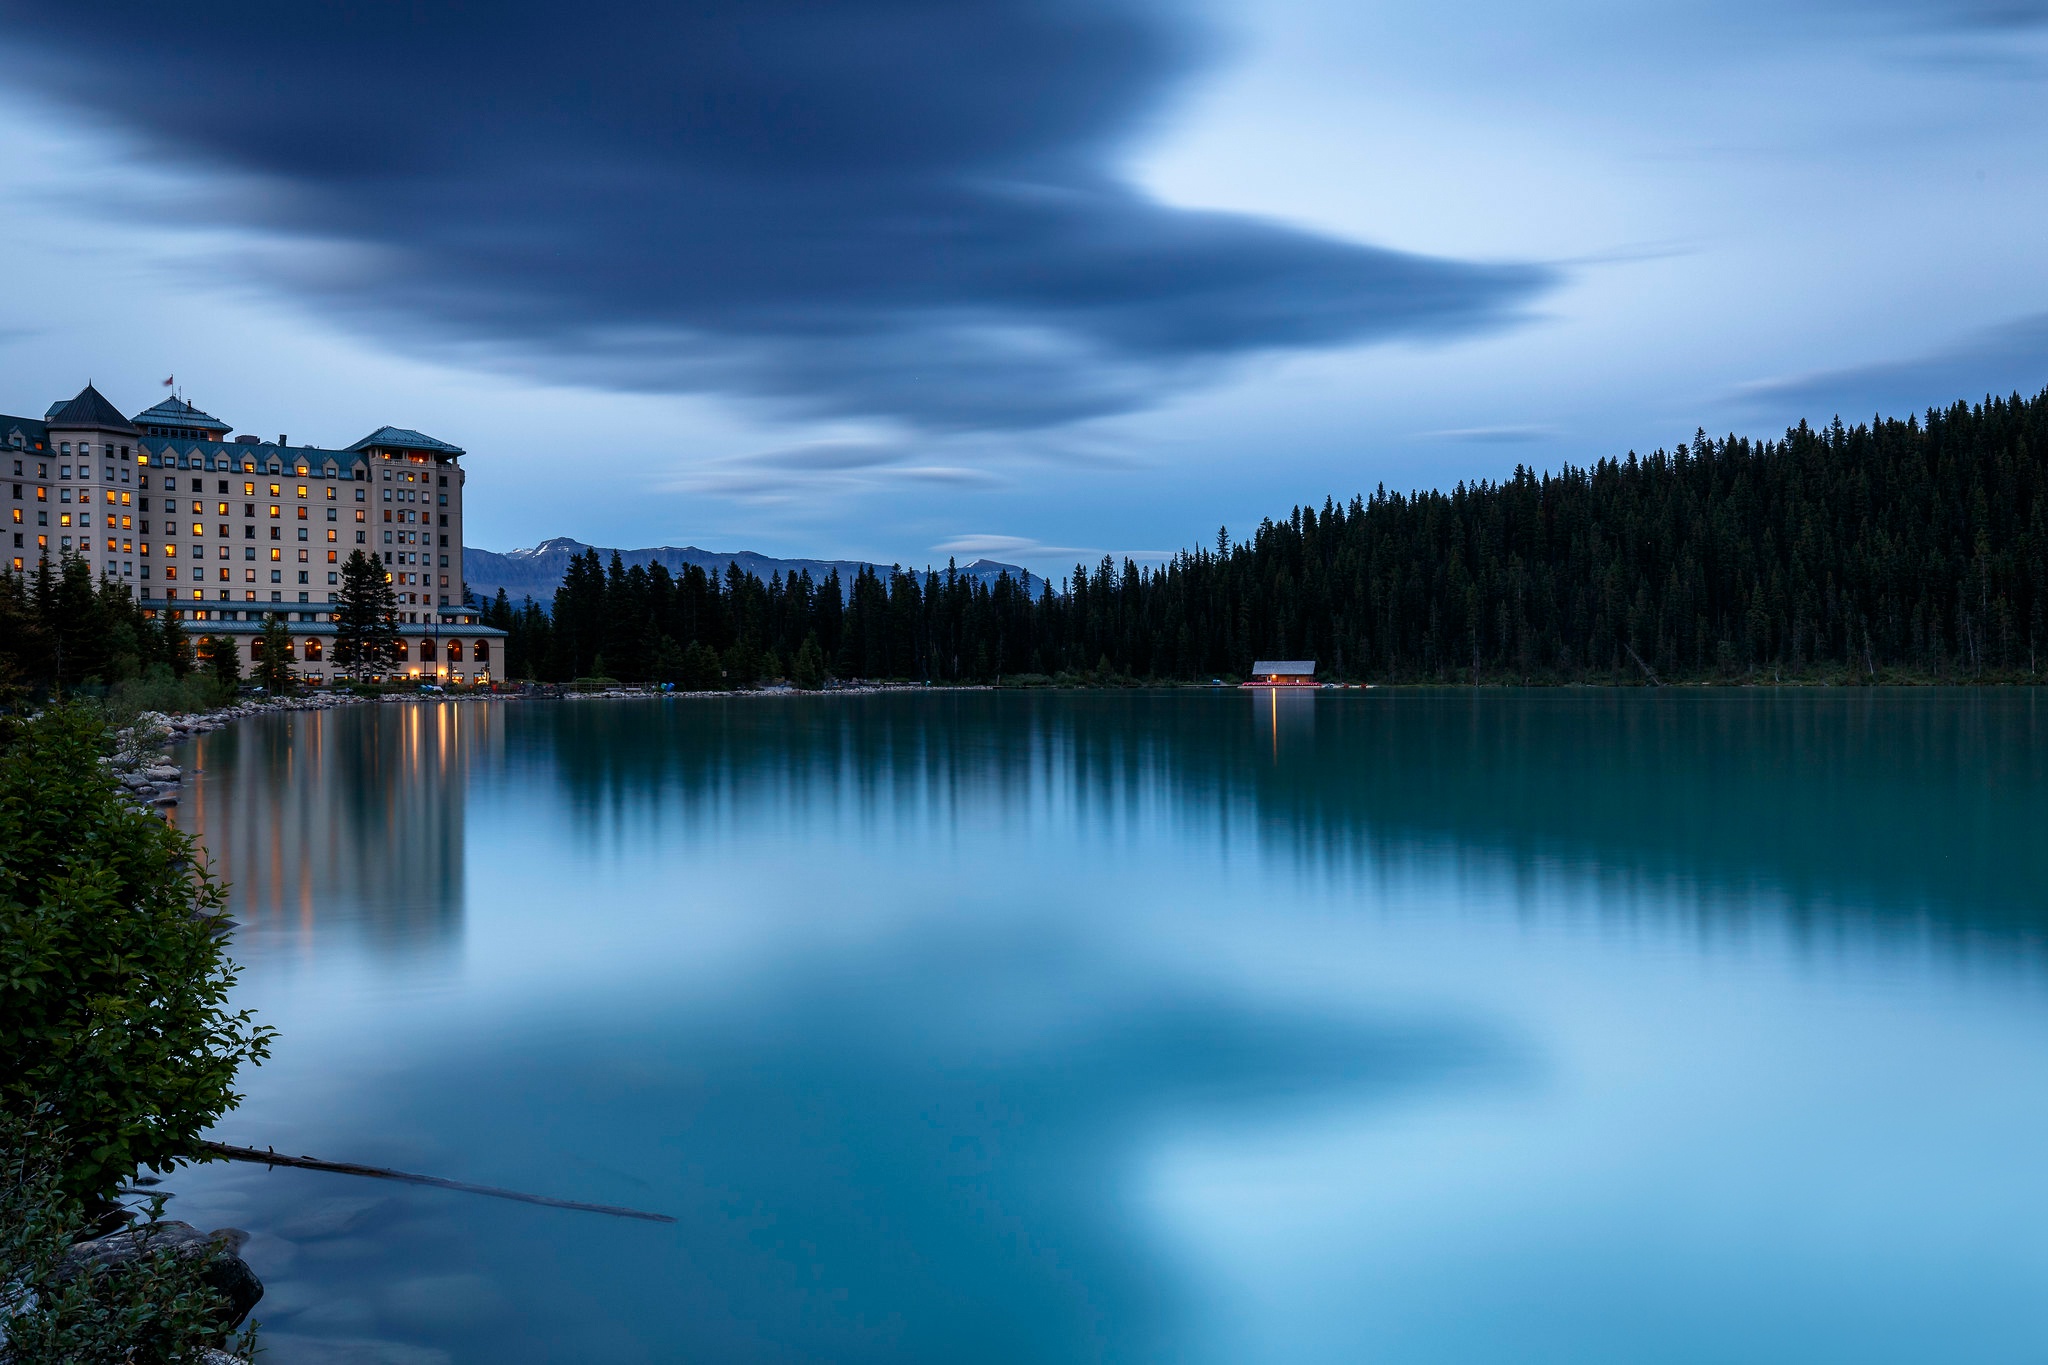 Forest Building Canada Alberta Hotel Lake Louise 2048x1365